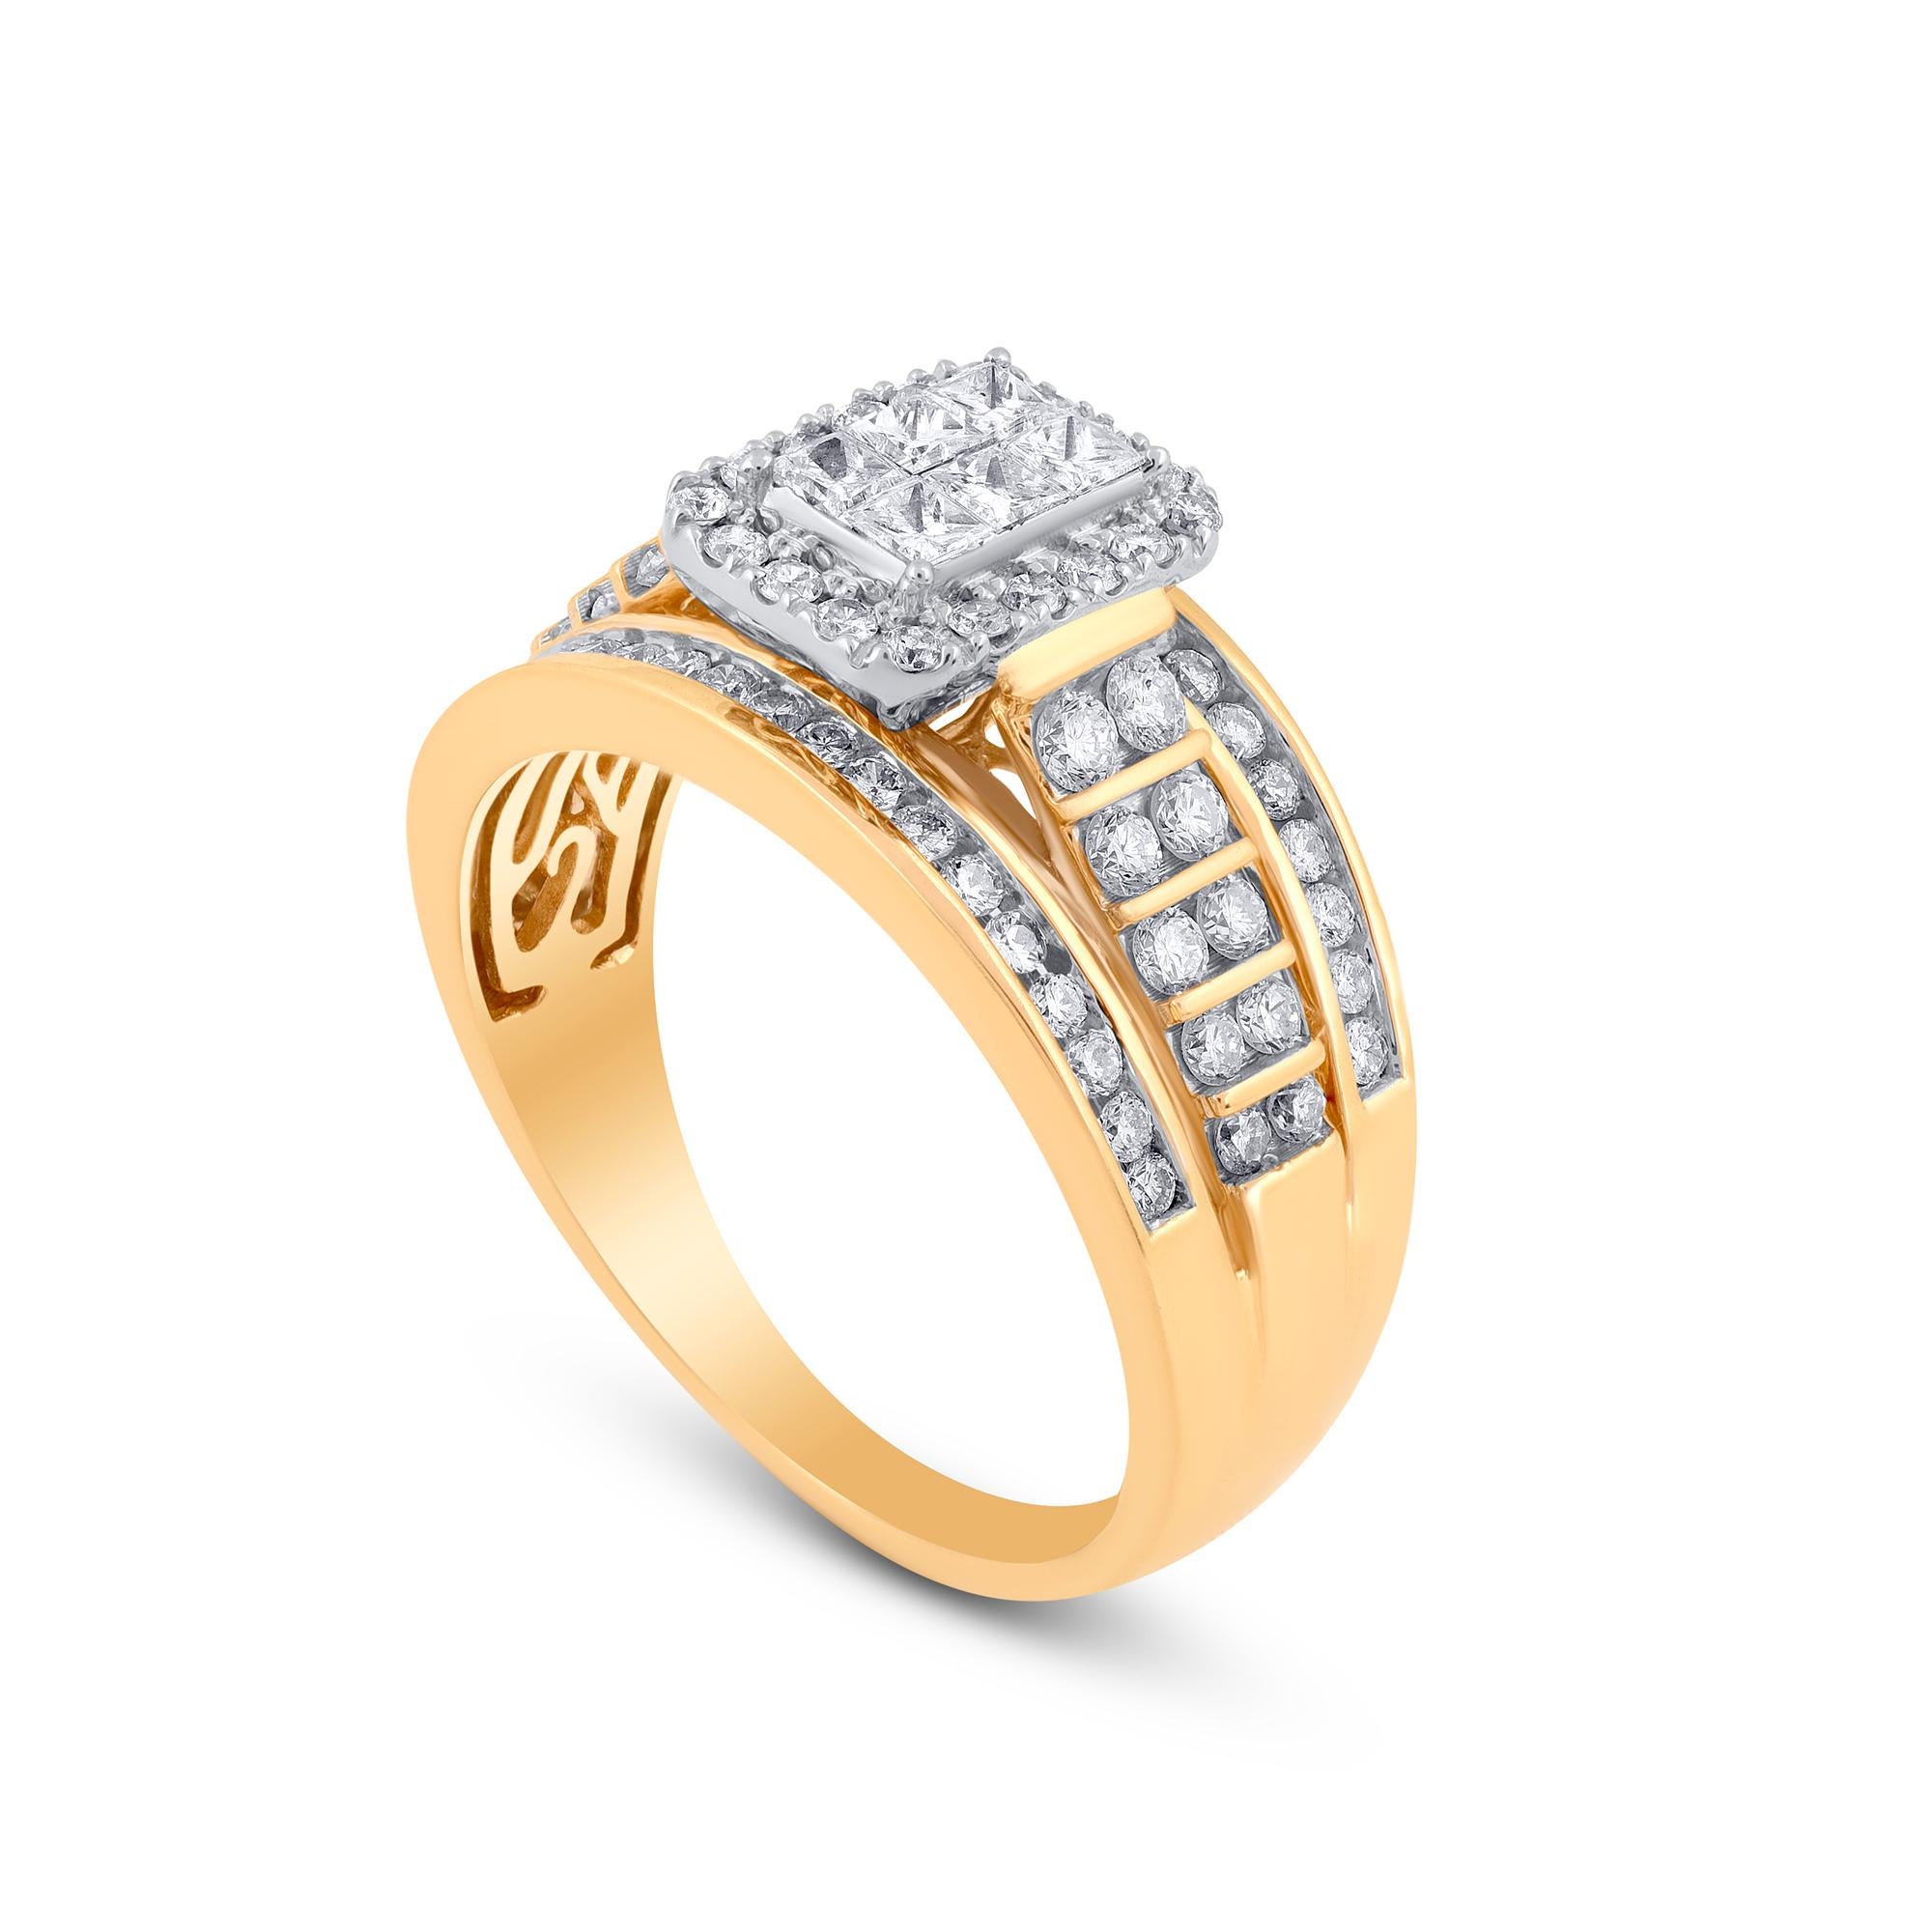 Contemporary TJD 1.0 Carat Princess & Round White Diamond 14KT Yellow Gold Engagement Ring For Sale